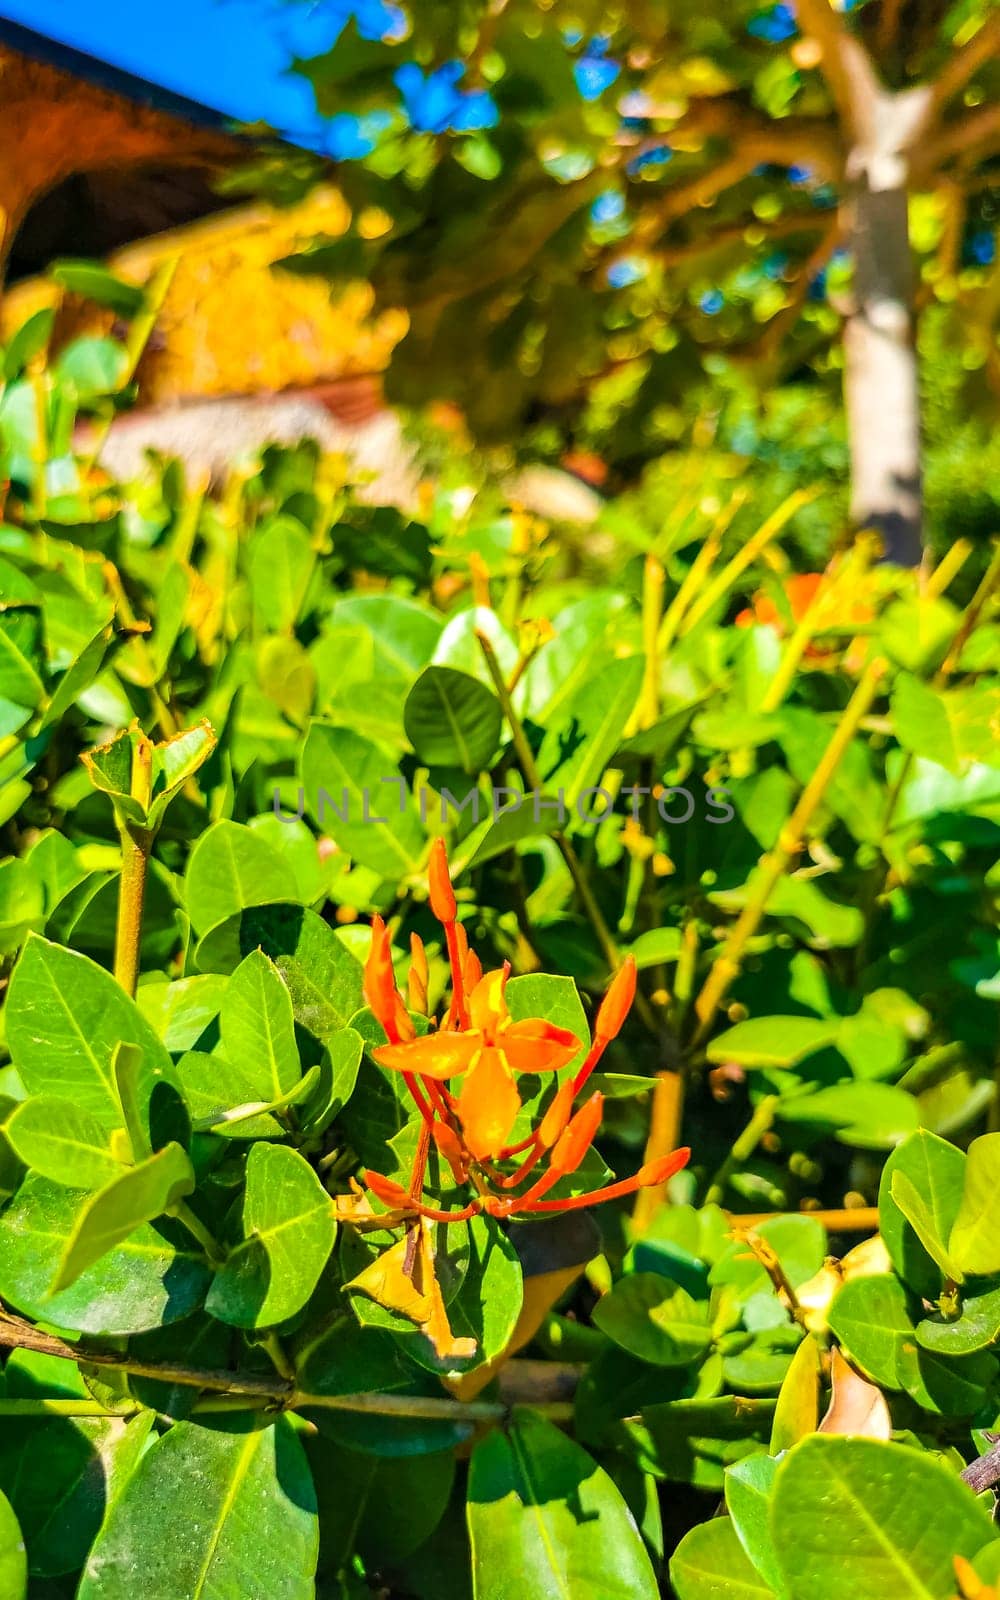 Red orange and yellow pink flower flowers and plants plant in tropical garden jungle forest and nature in Zicatela Puerto Escondido Oaxaca Mexico.